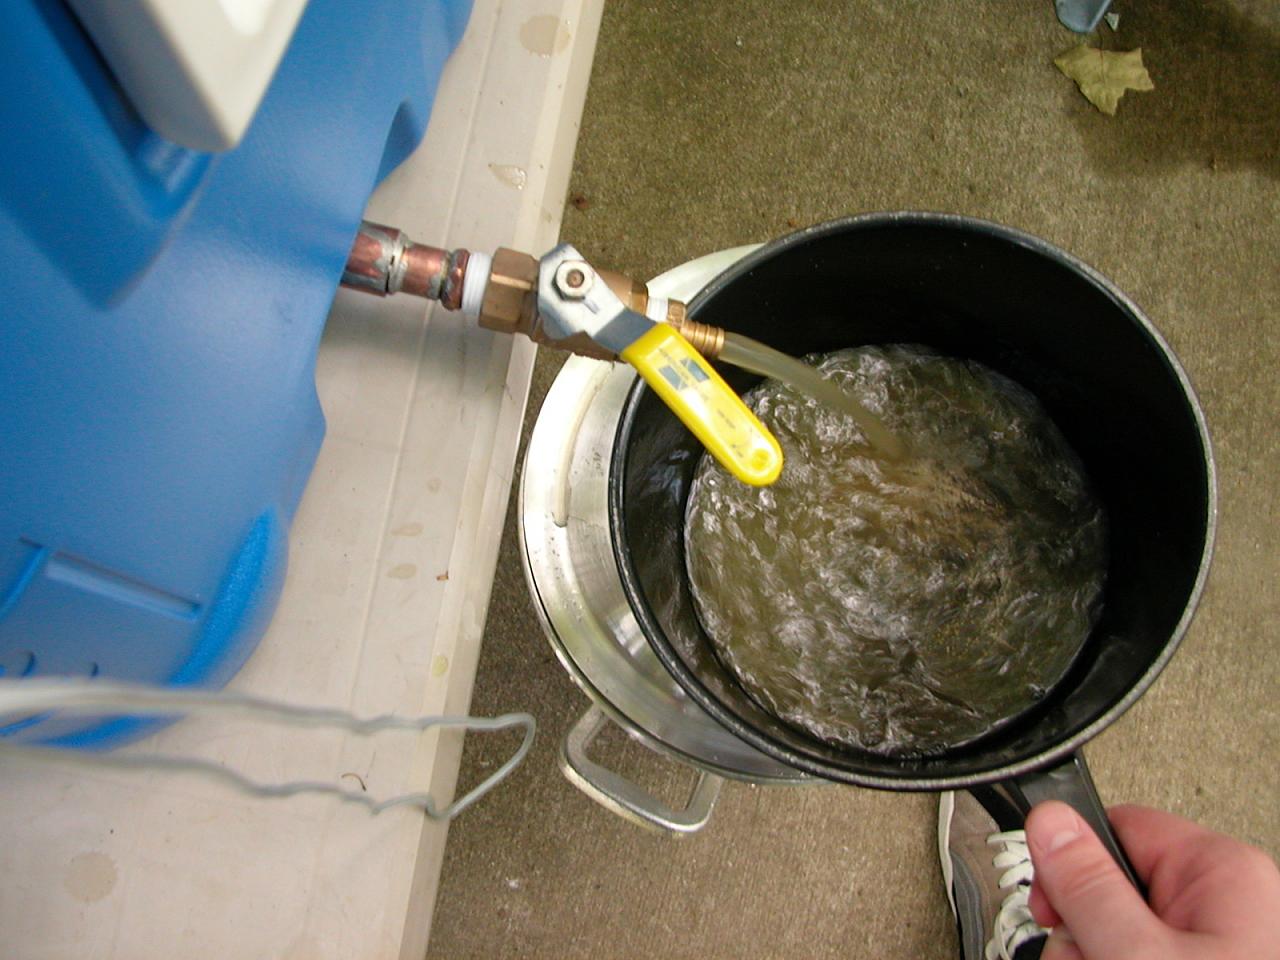 Recirculating the first couple quarts of wort before draining the cooler into the brew pot.